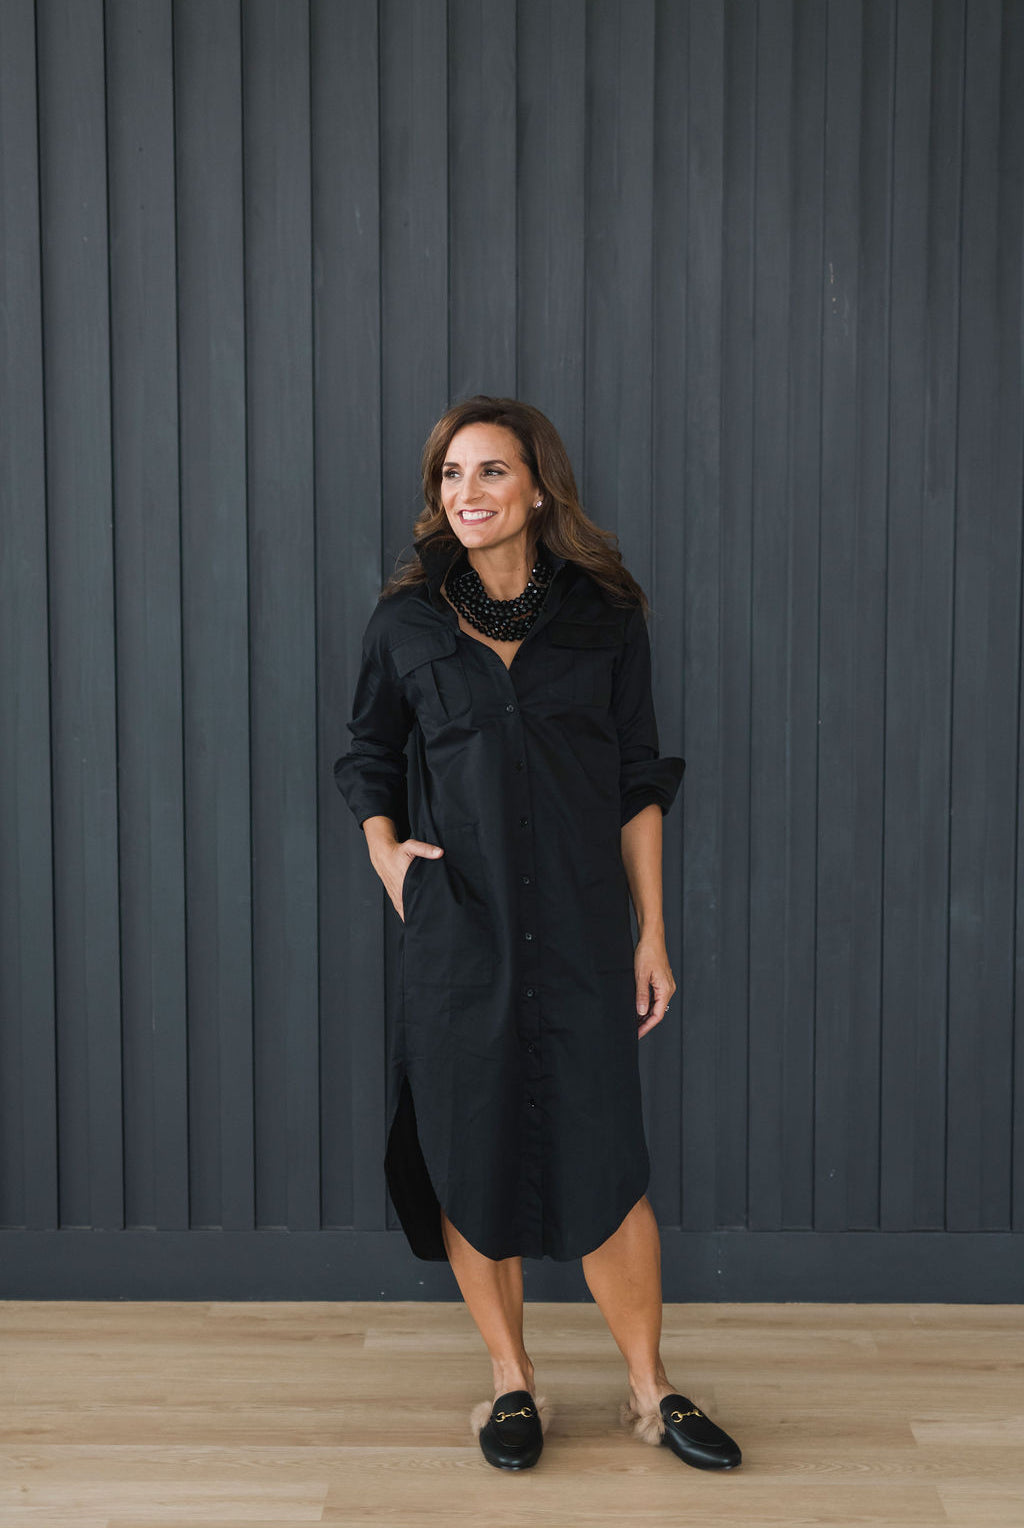 Crisp and classic black button down shirt dress. Mid length, pockets, popped collar.